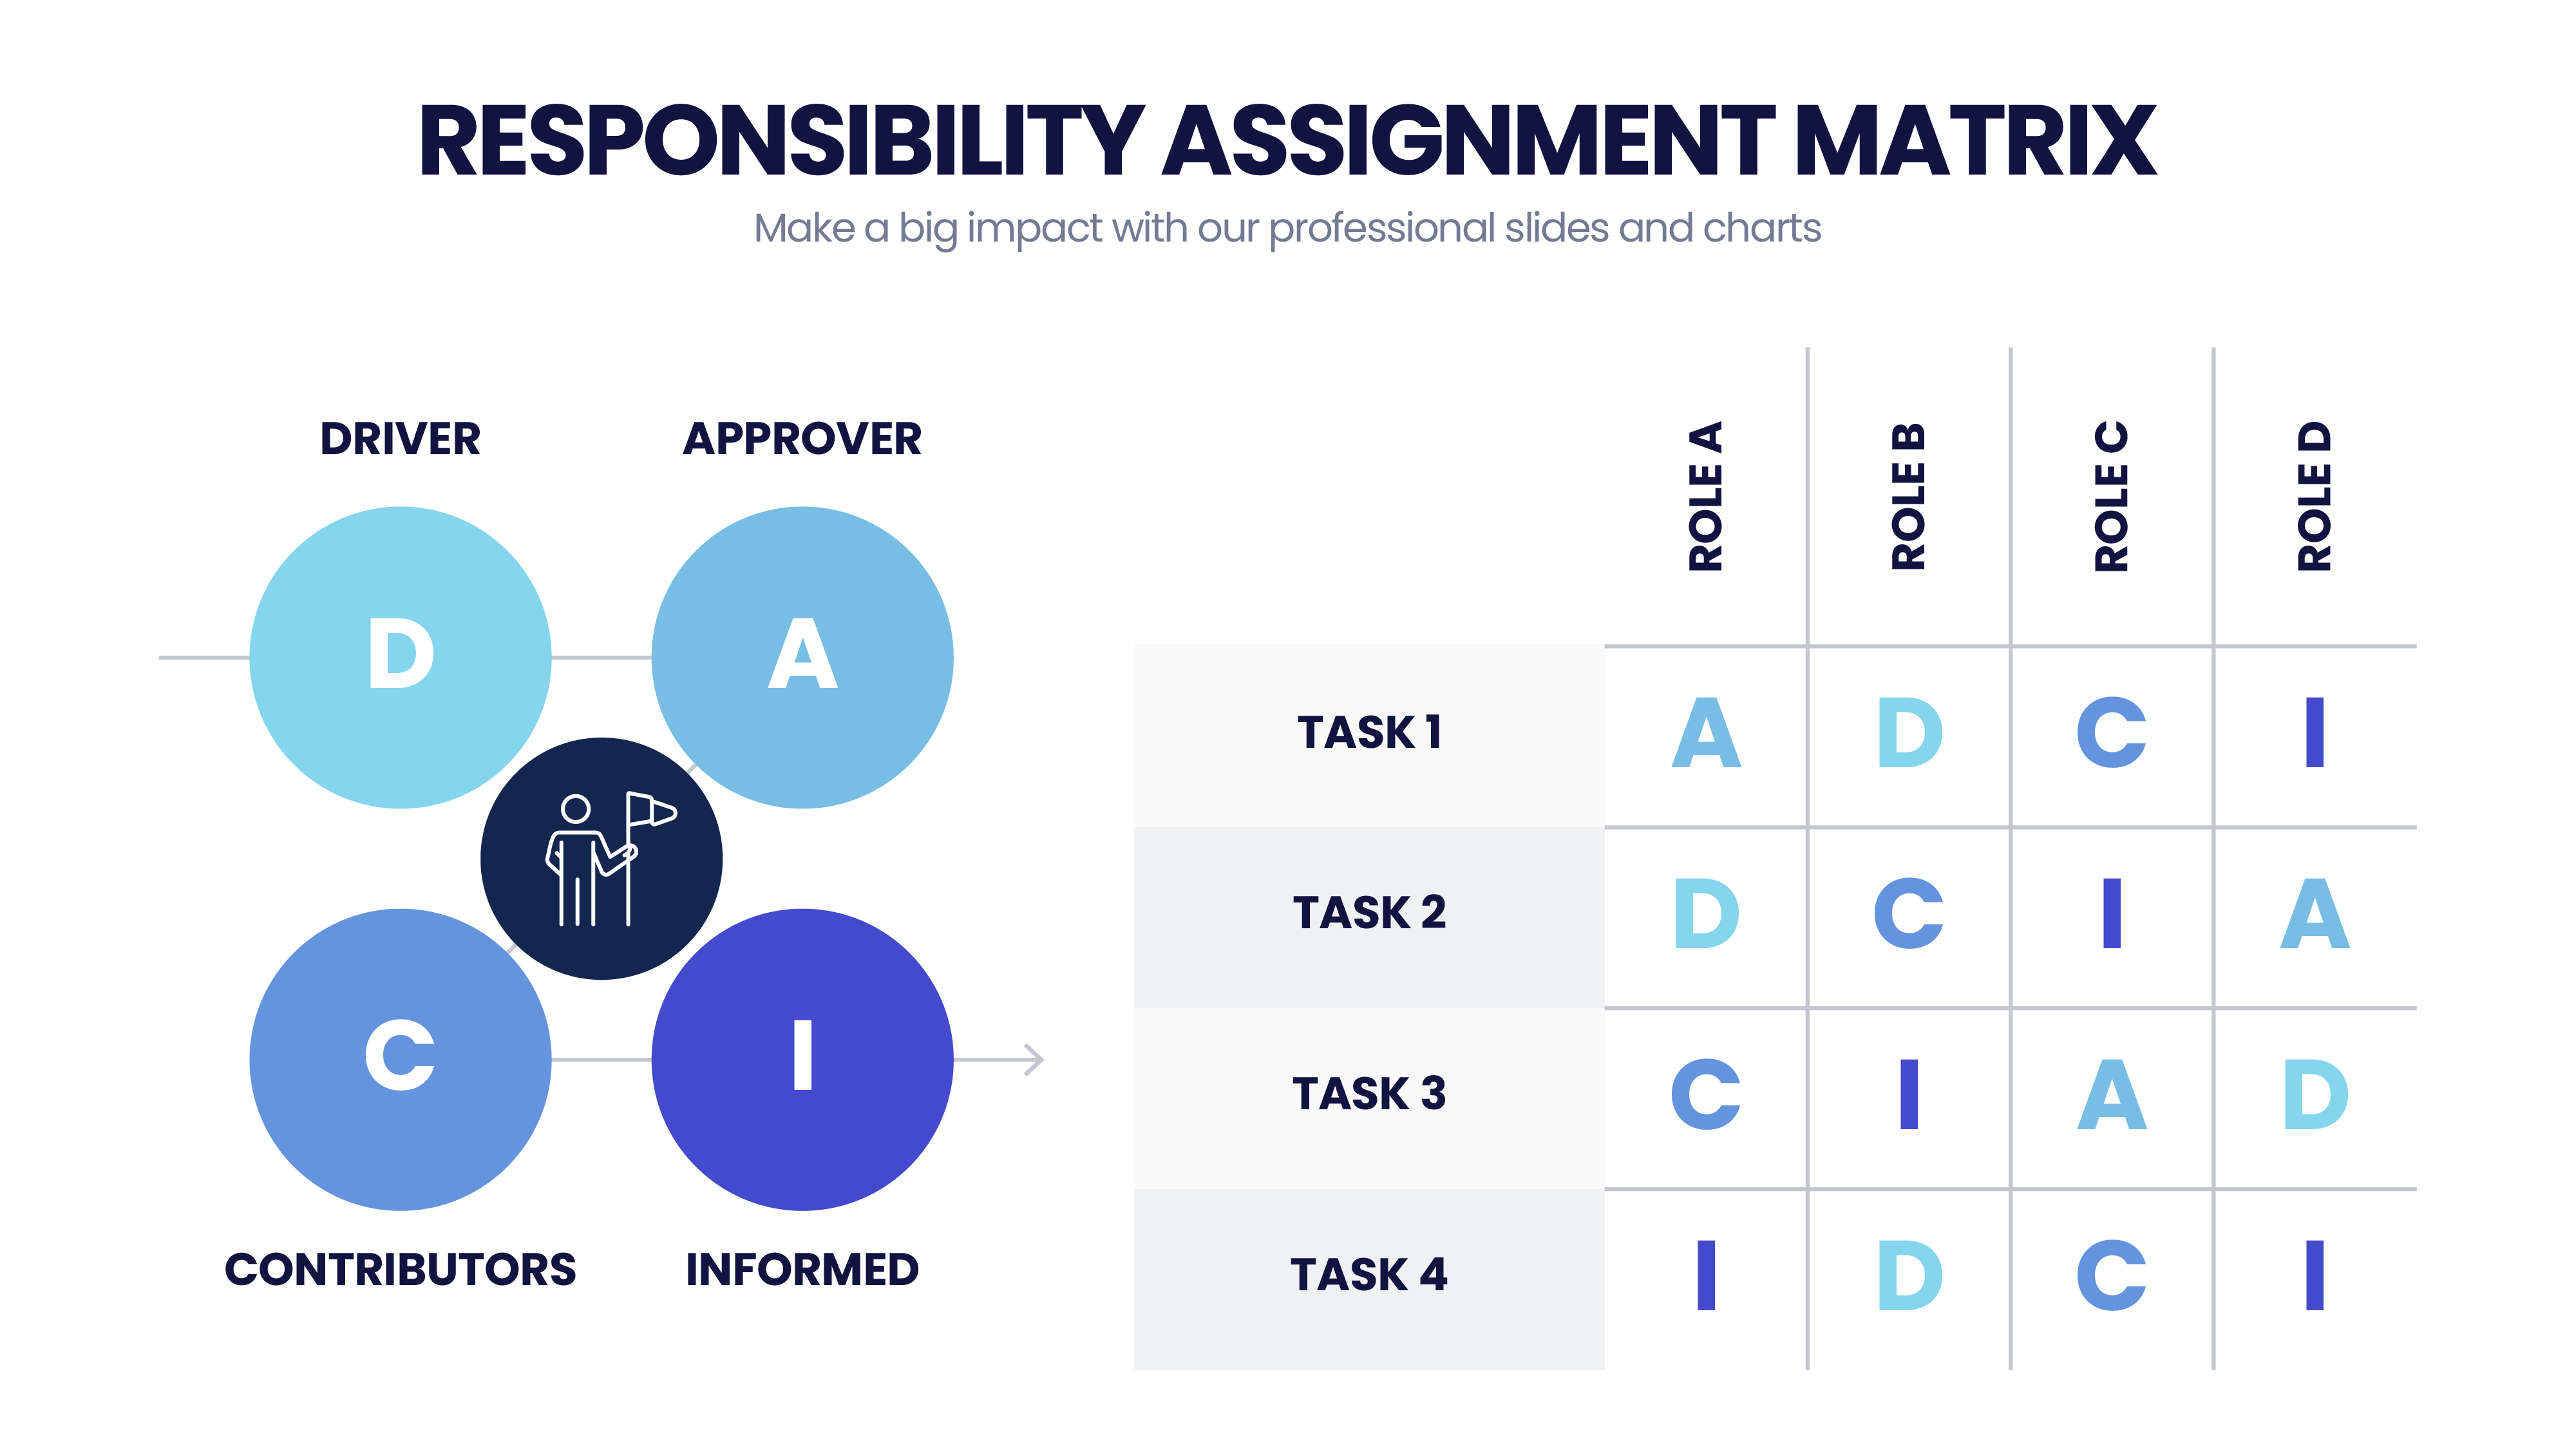 responsibility assignment matrix is defined as